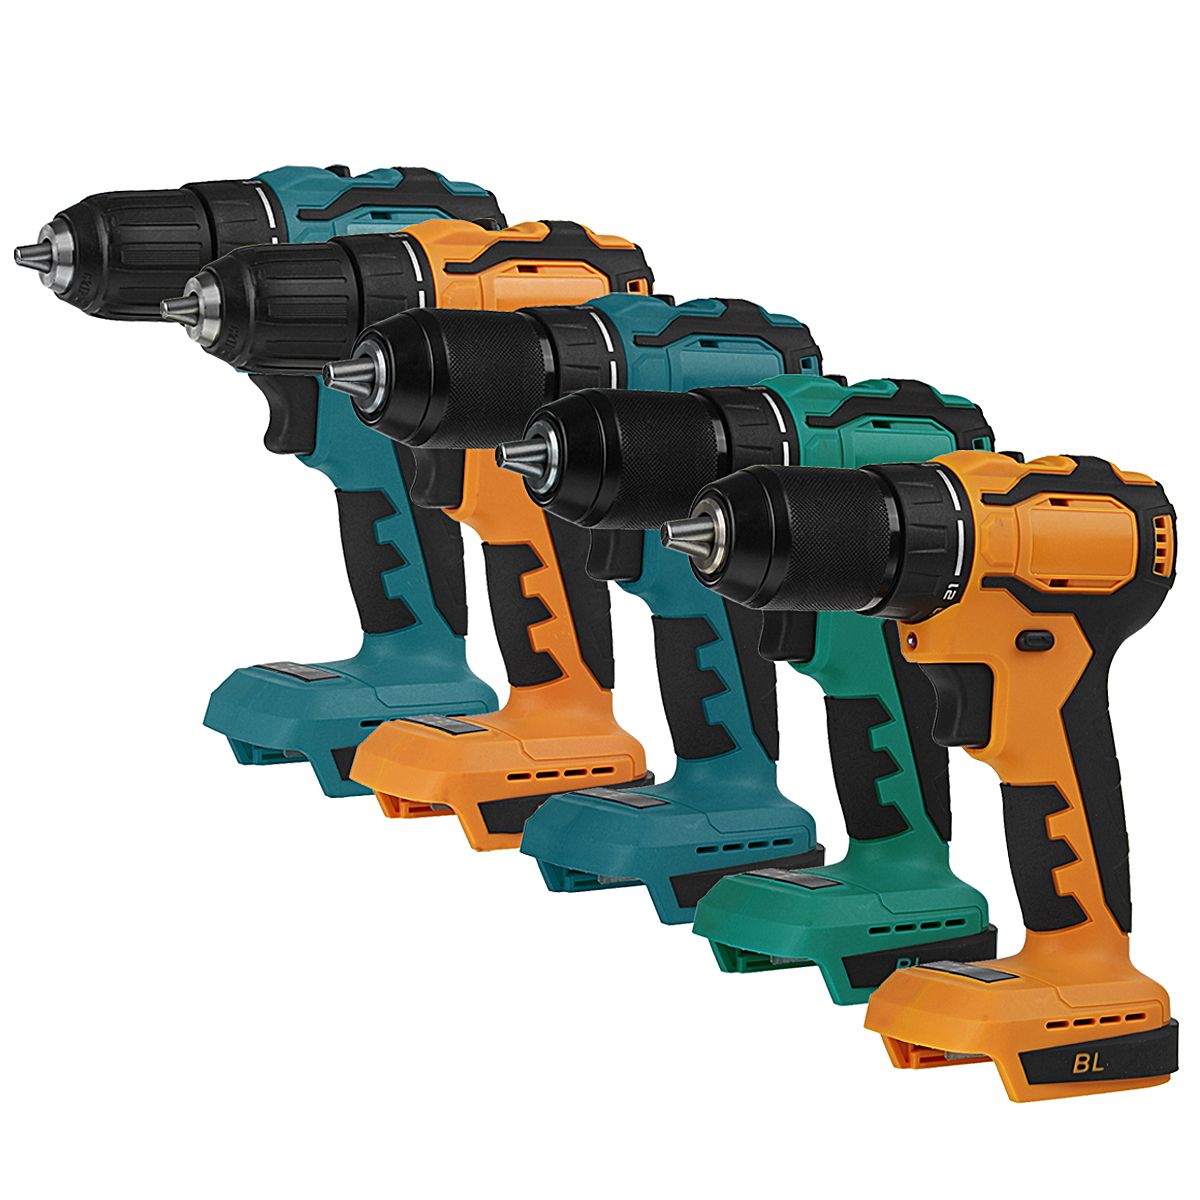 Dual-Speed-Brushless-Electric-Drill-1013mm-Chuck-Rechargeable-Electric-Screwdriver-for-Makita-18V-Ba-1758626